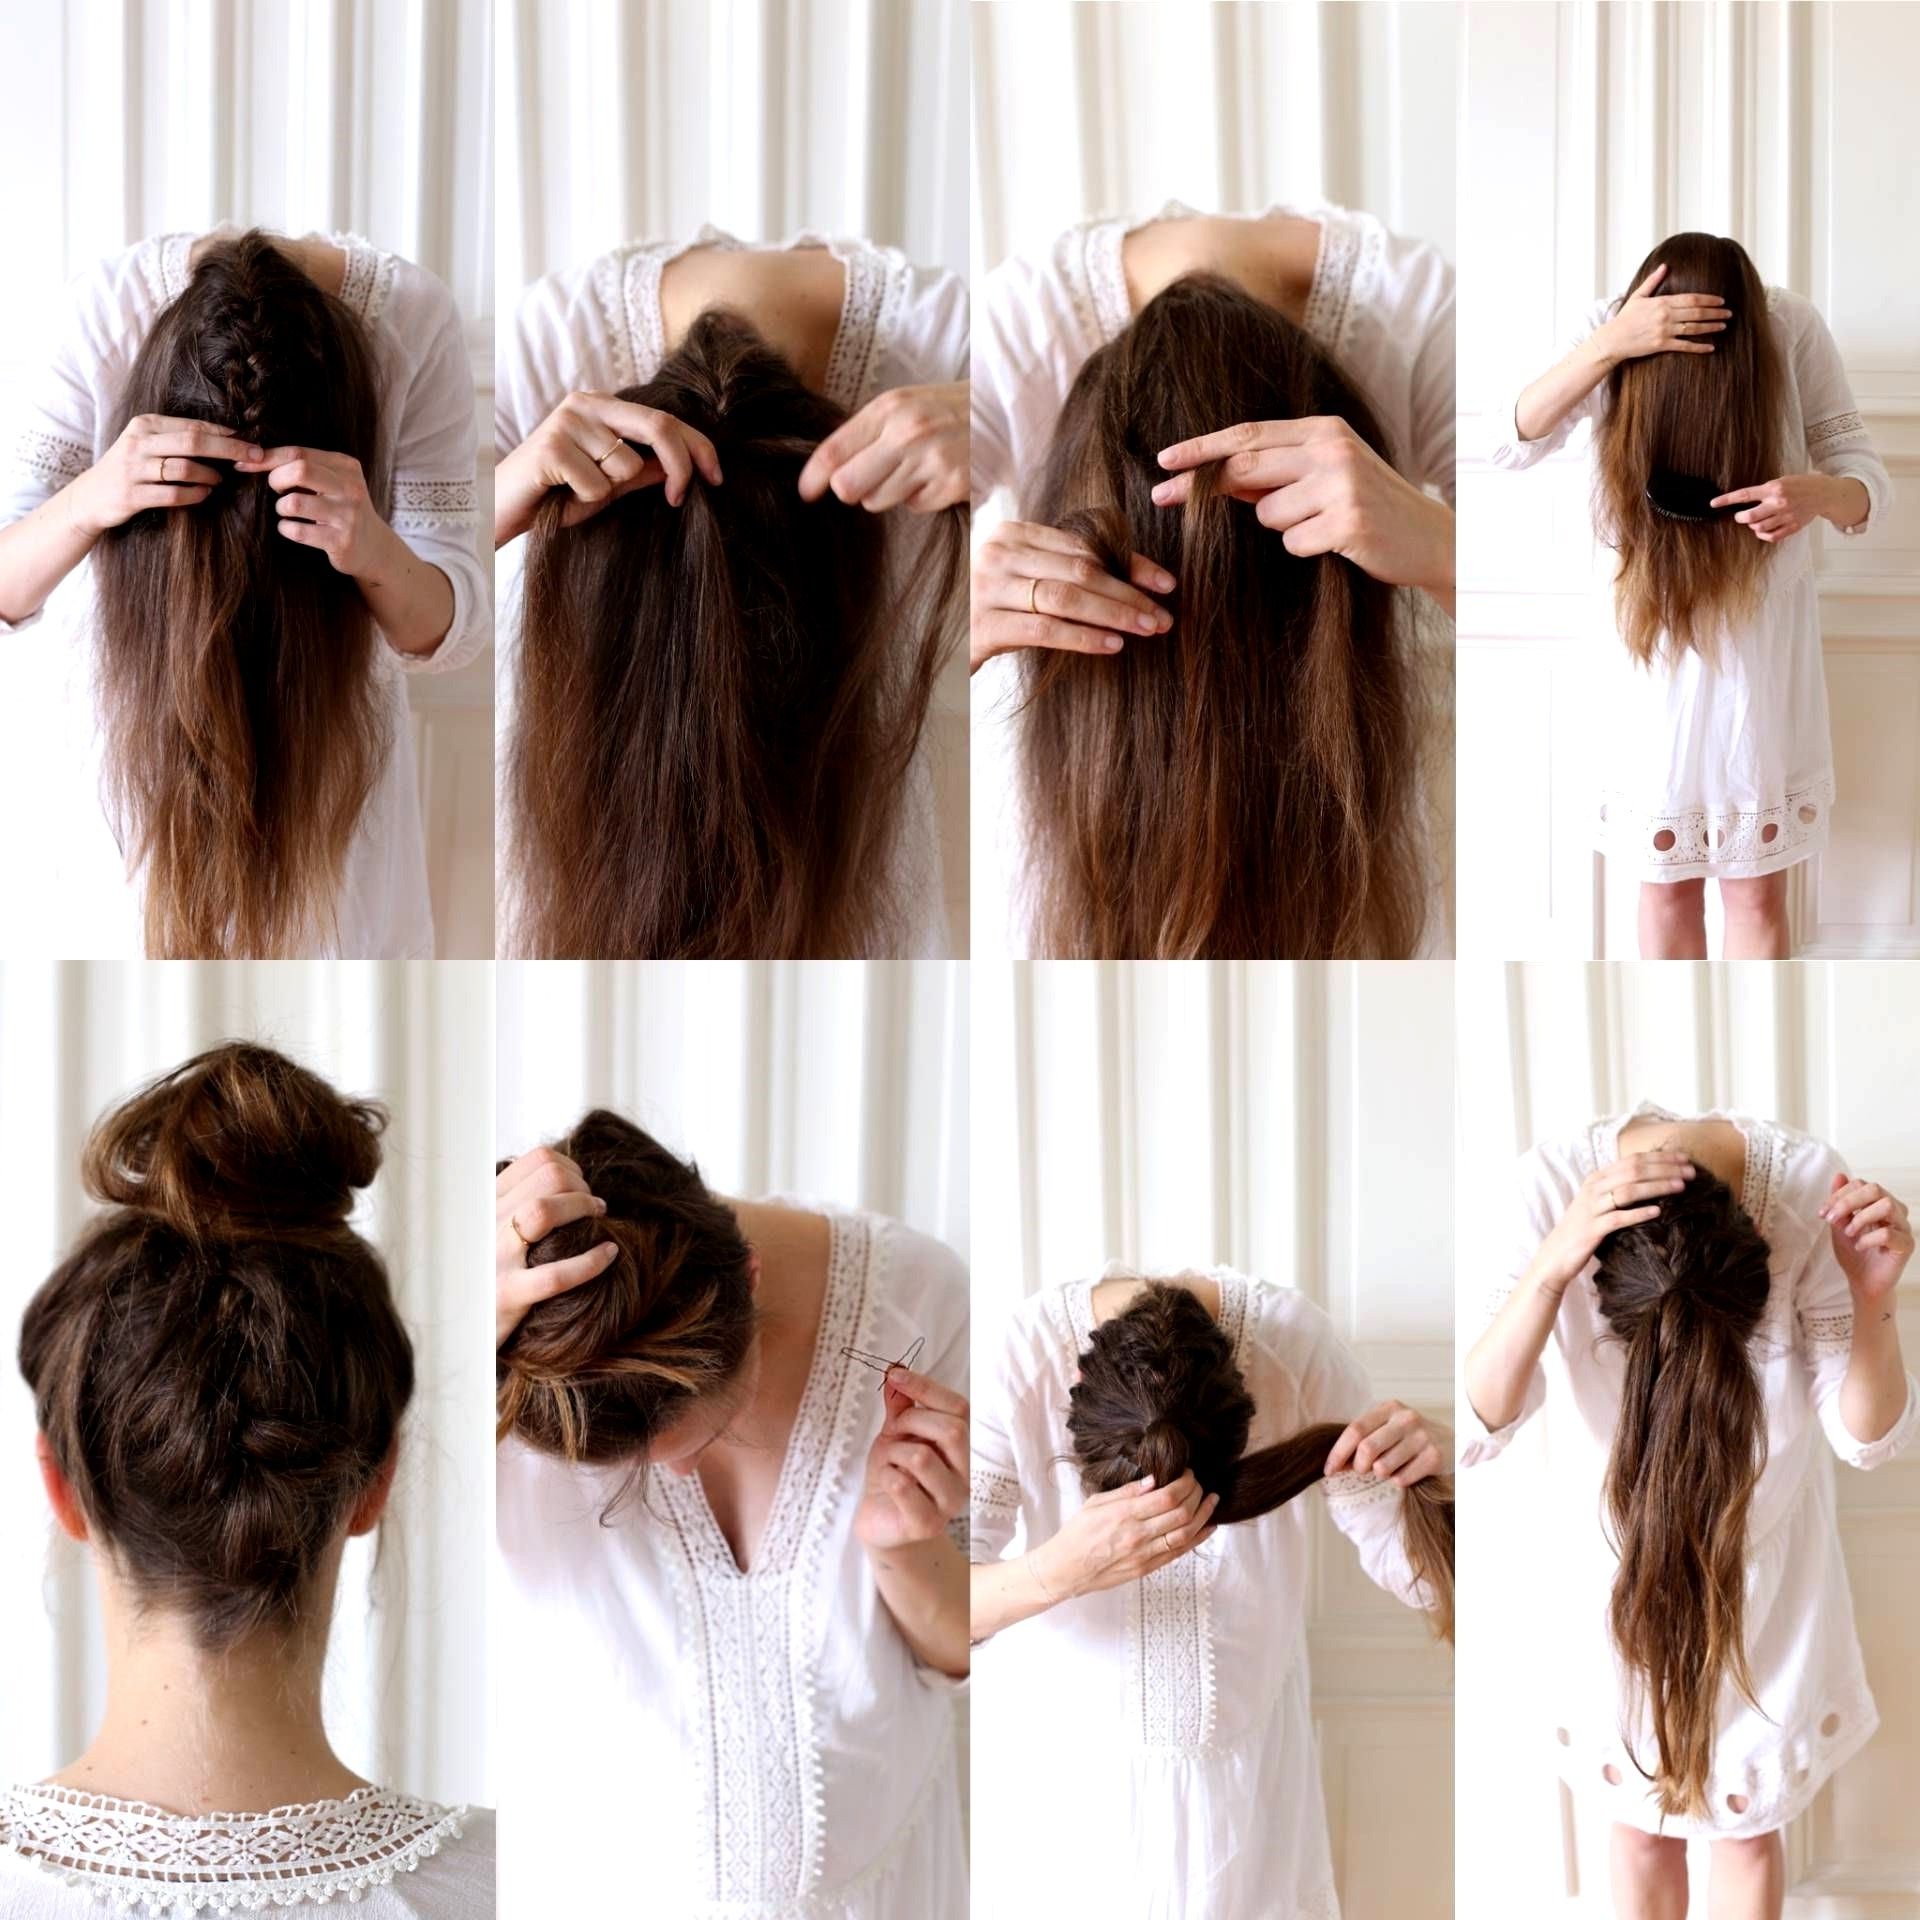 20 Great Upside Down French Braid Tutorial Within Current Upside Down French Braids Into A Bun (View 12 of 15)